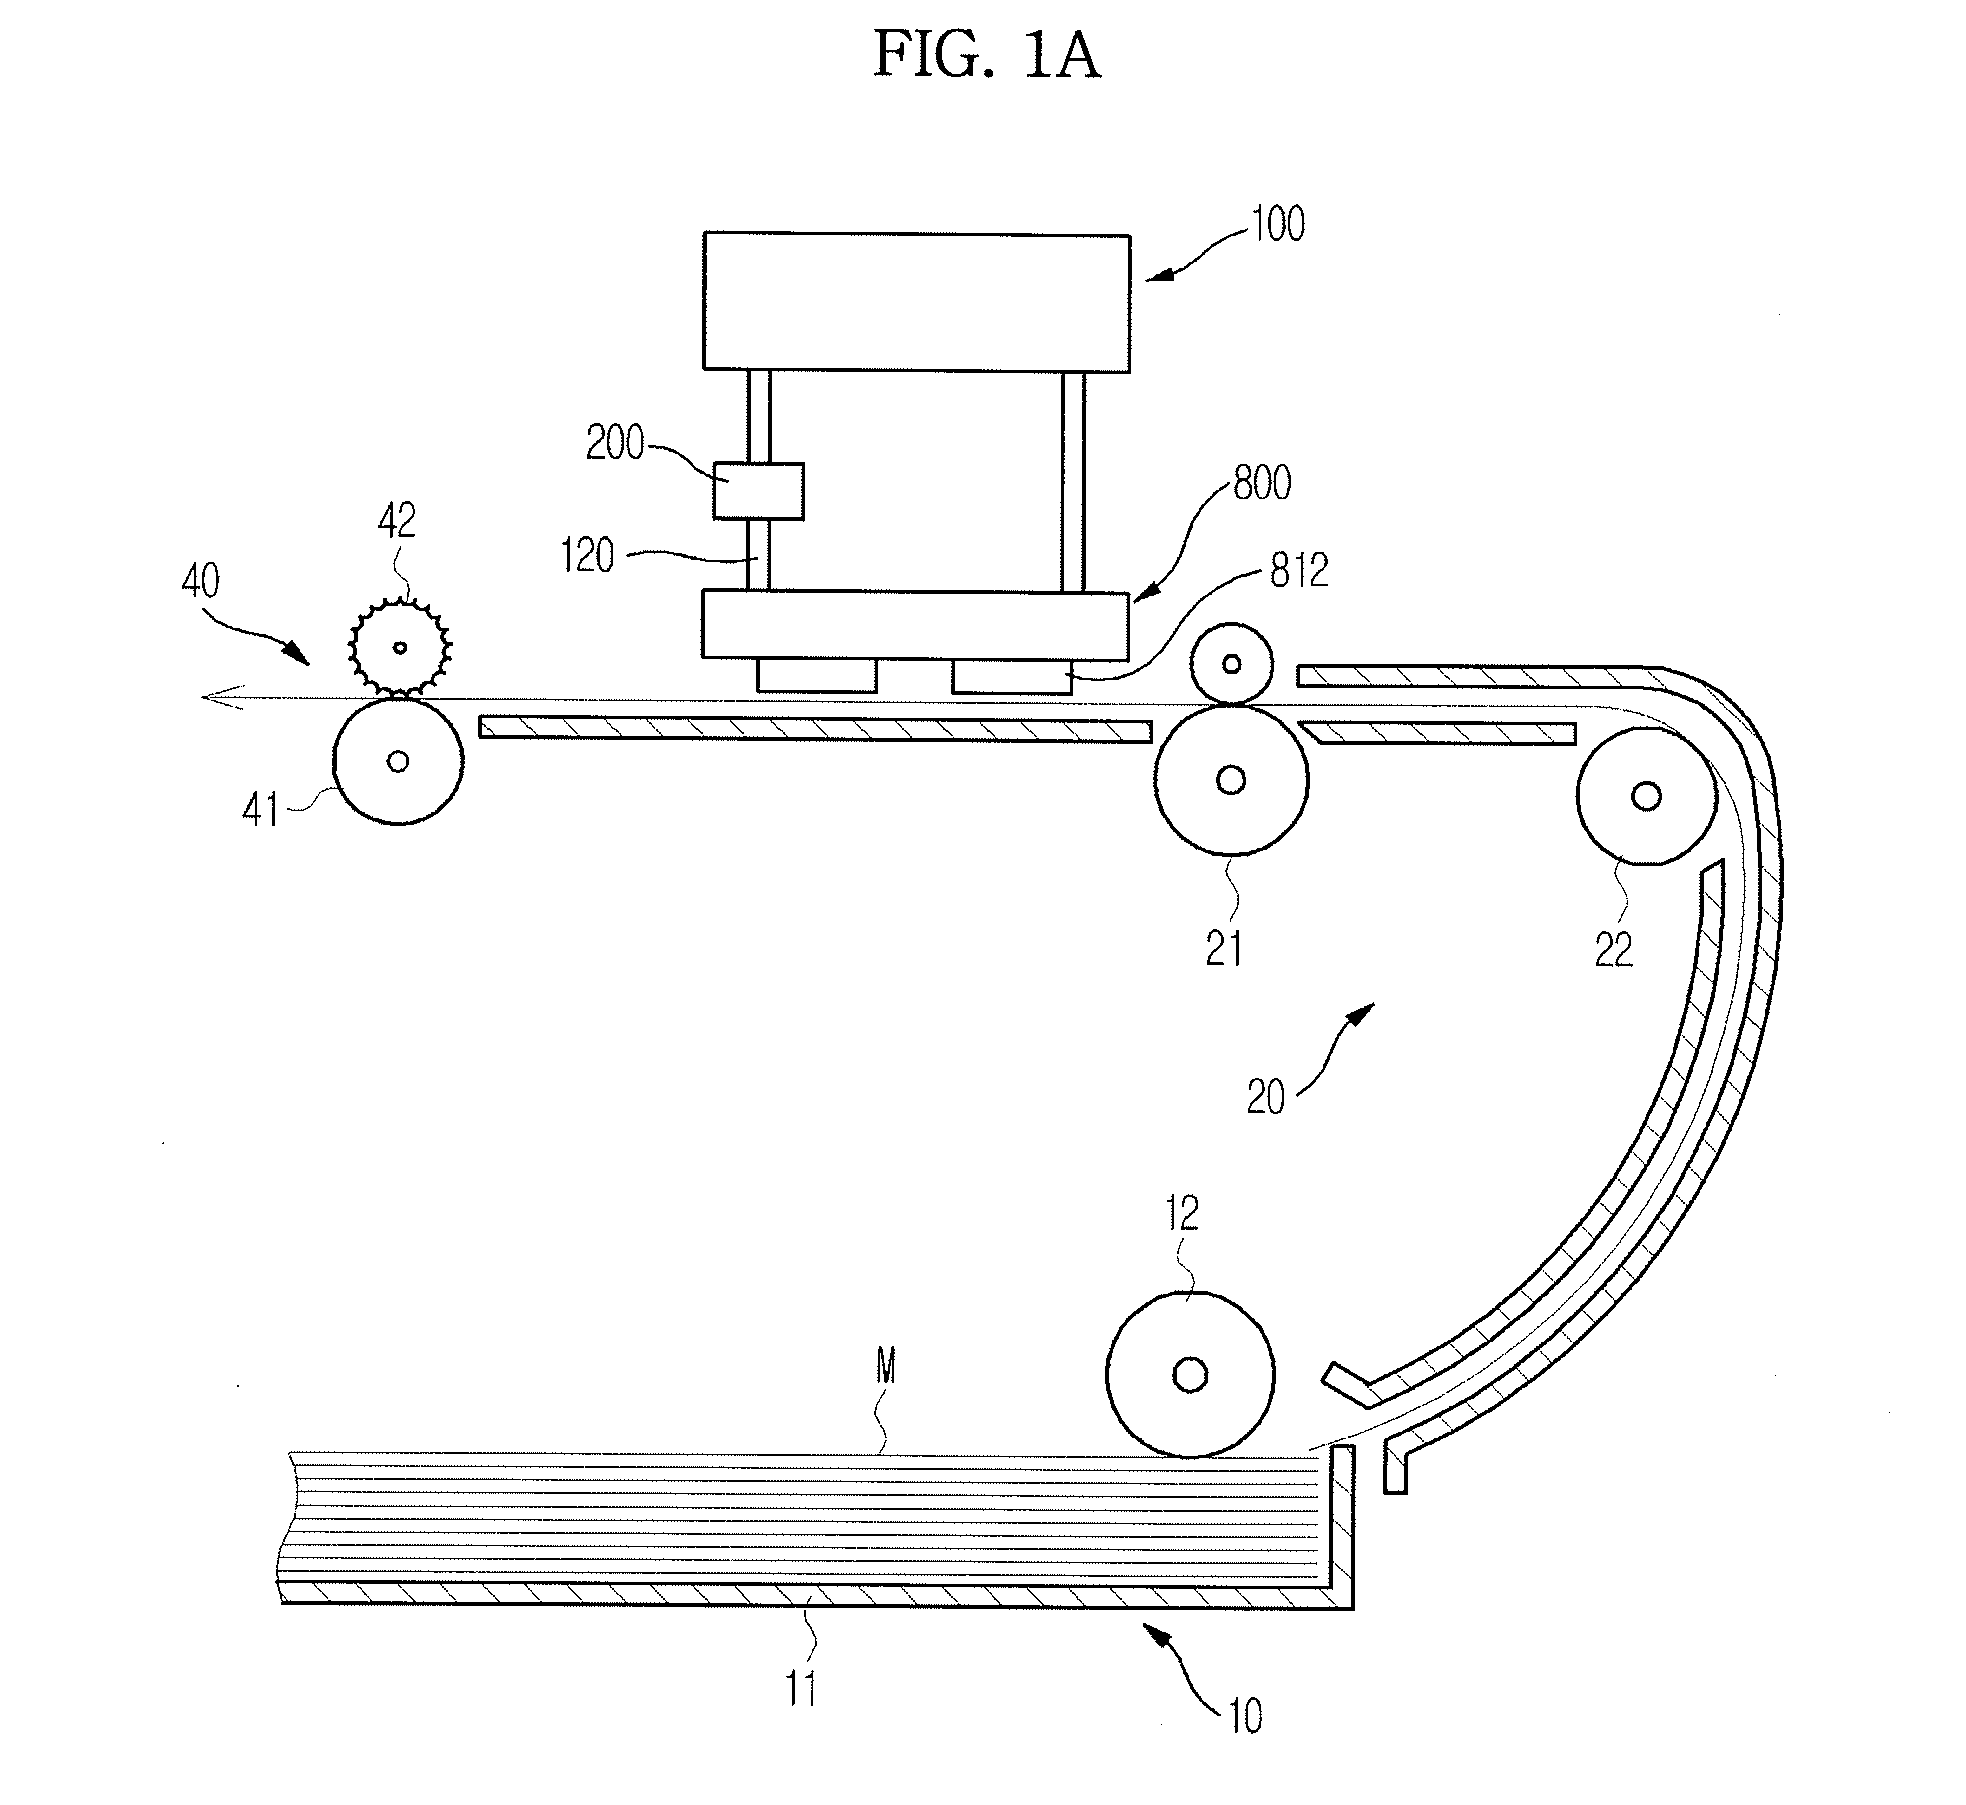 Inkjet image forming apparatus and method to control the same